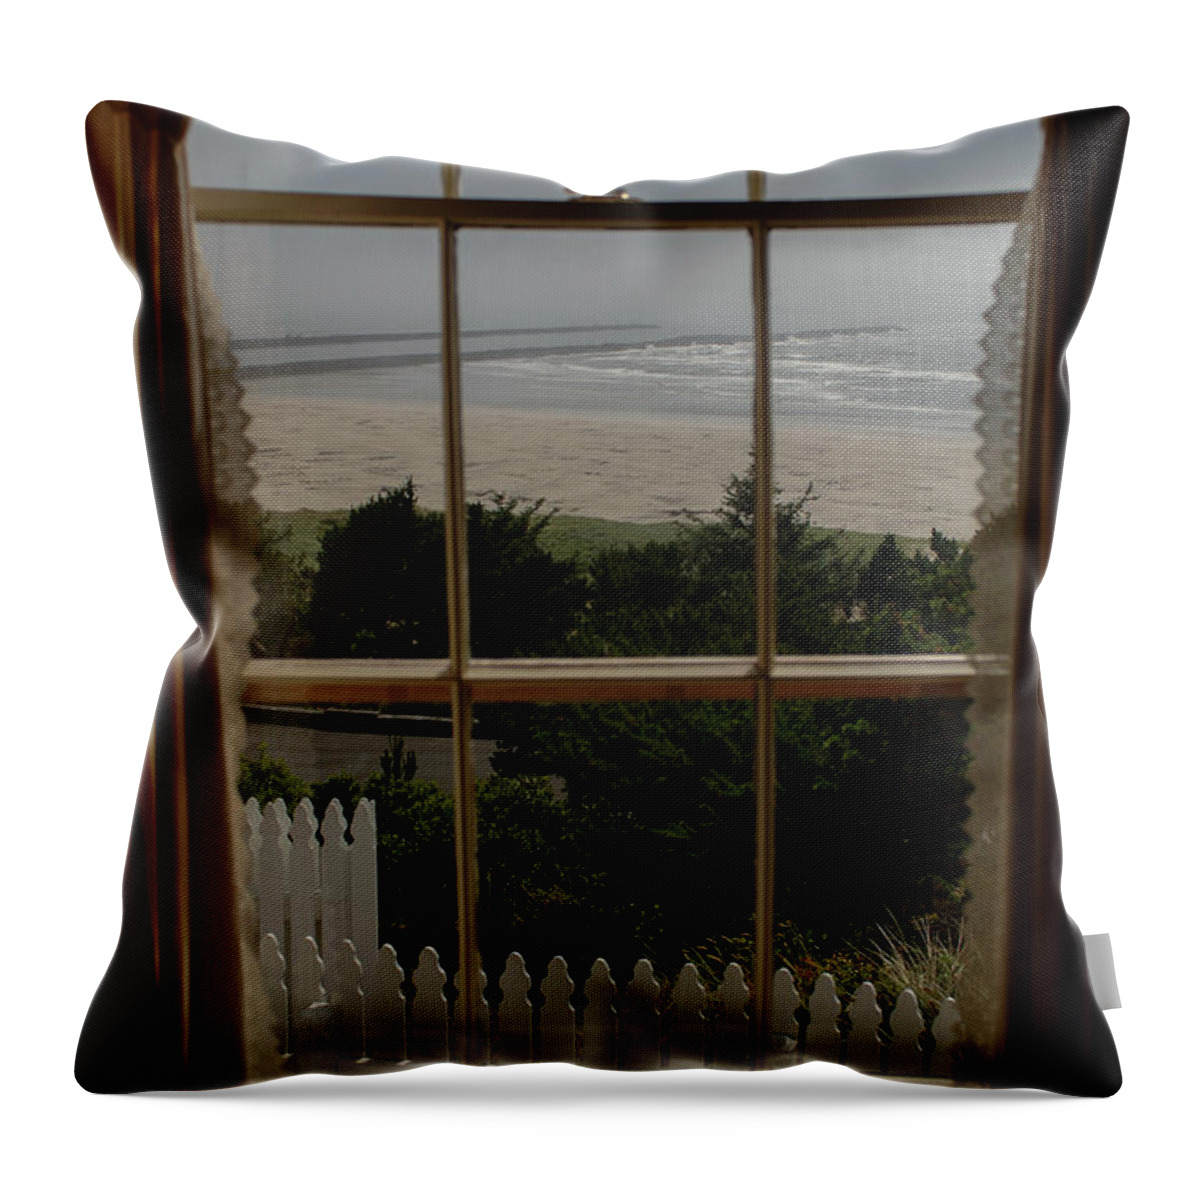 Lighthouse Throw Pillow featuring the photograph Harbor Entrance by David Shuler